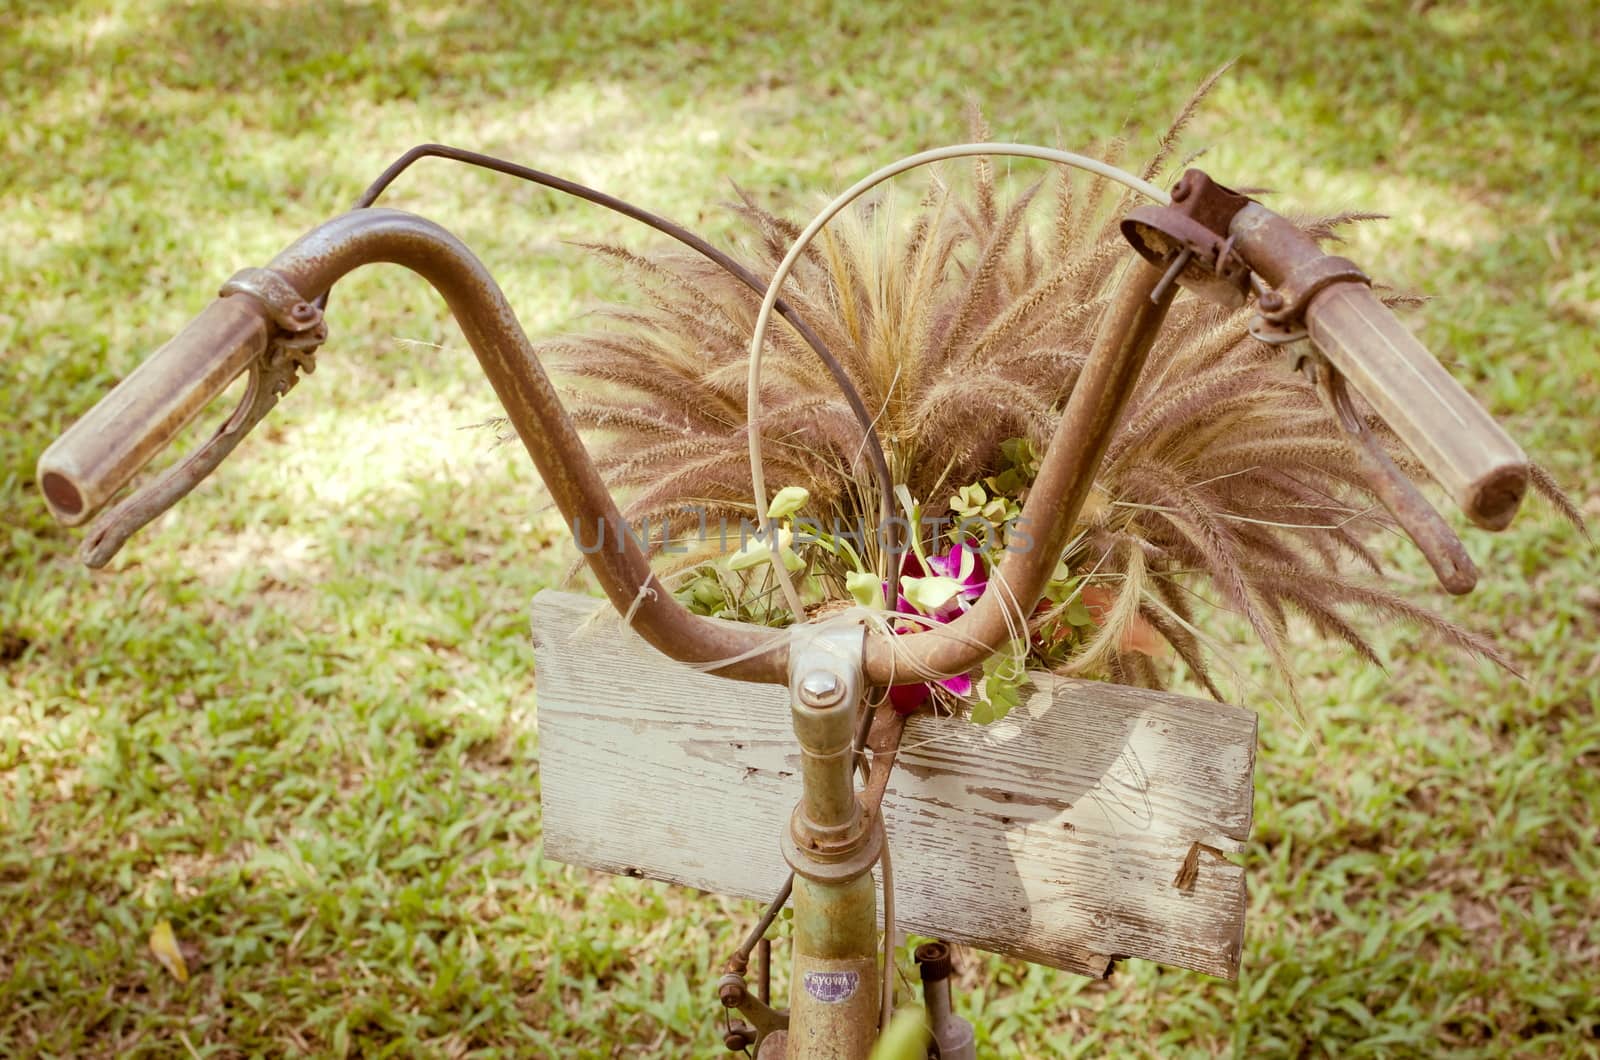 Vintage bicycle with flower grass
 by nop16